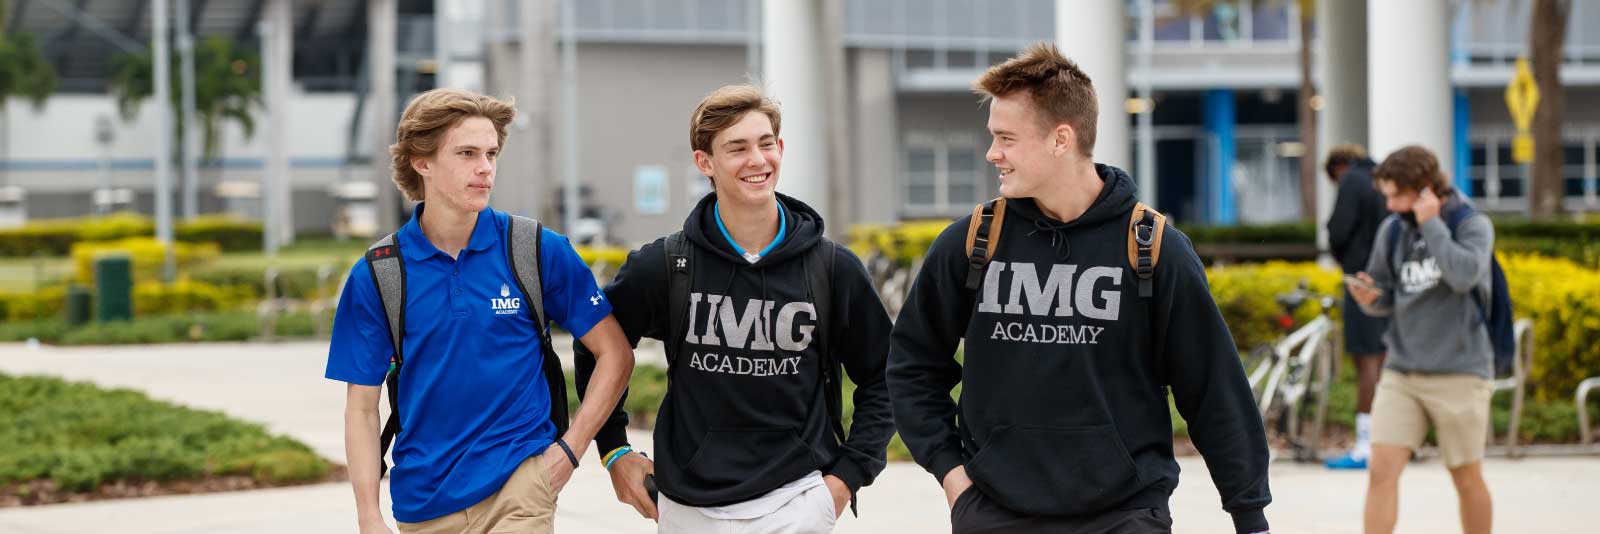 IMG students walking on campus